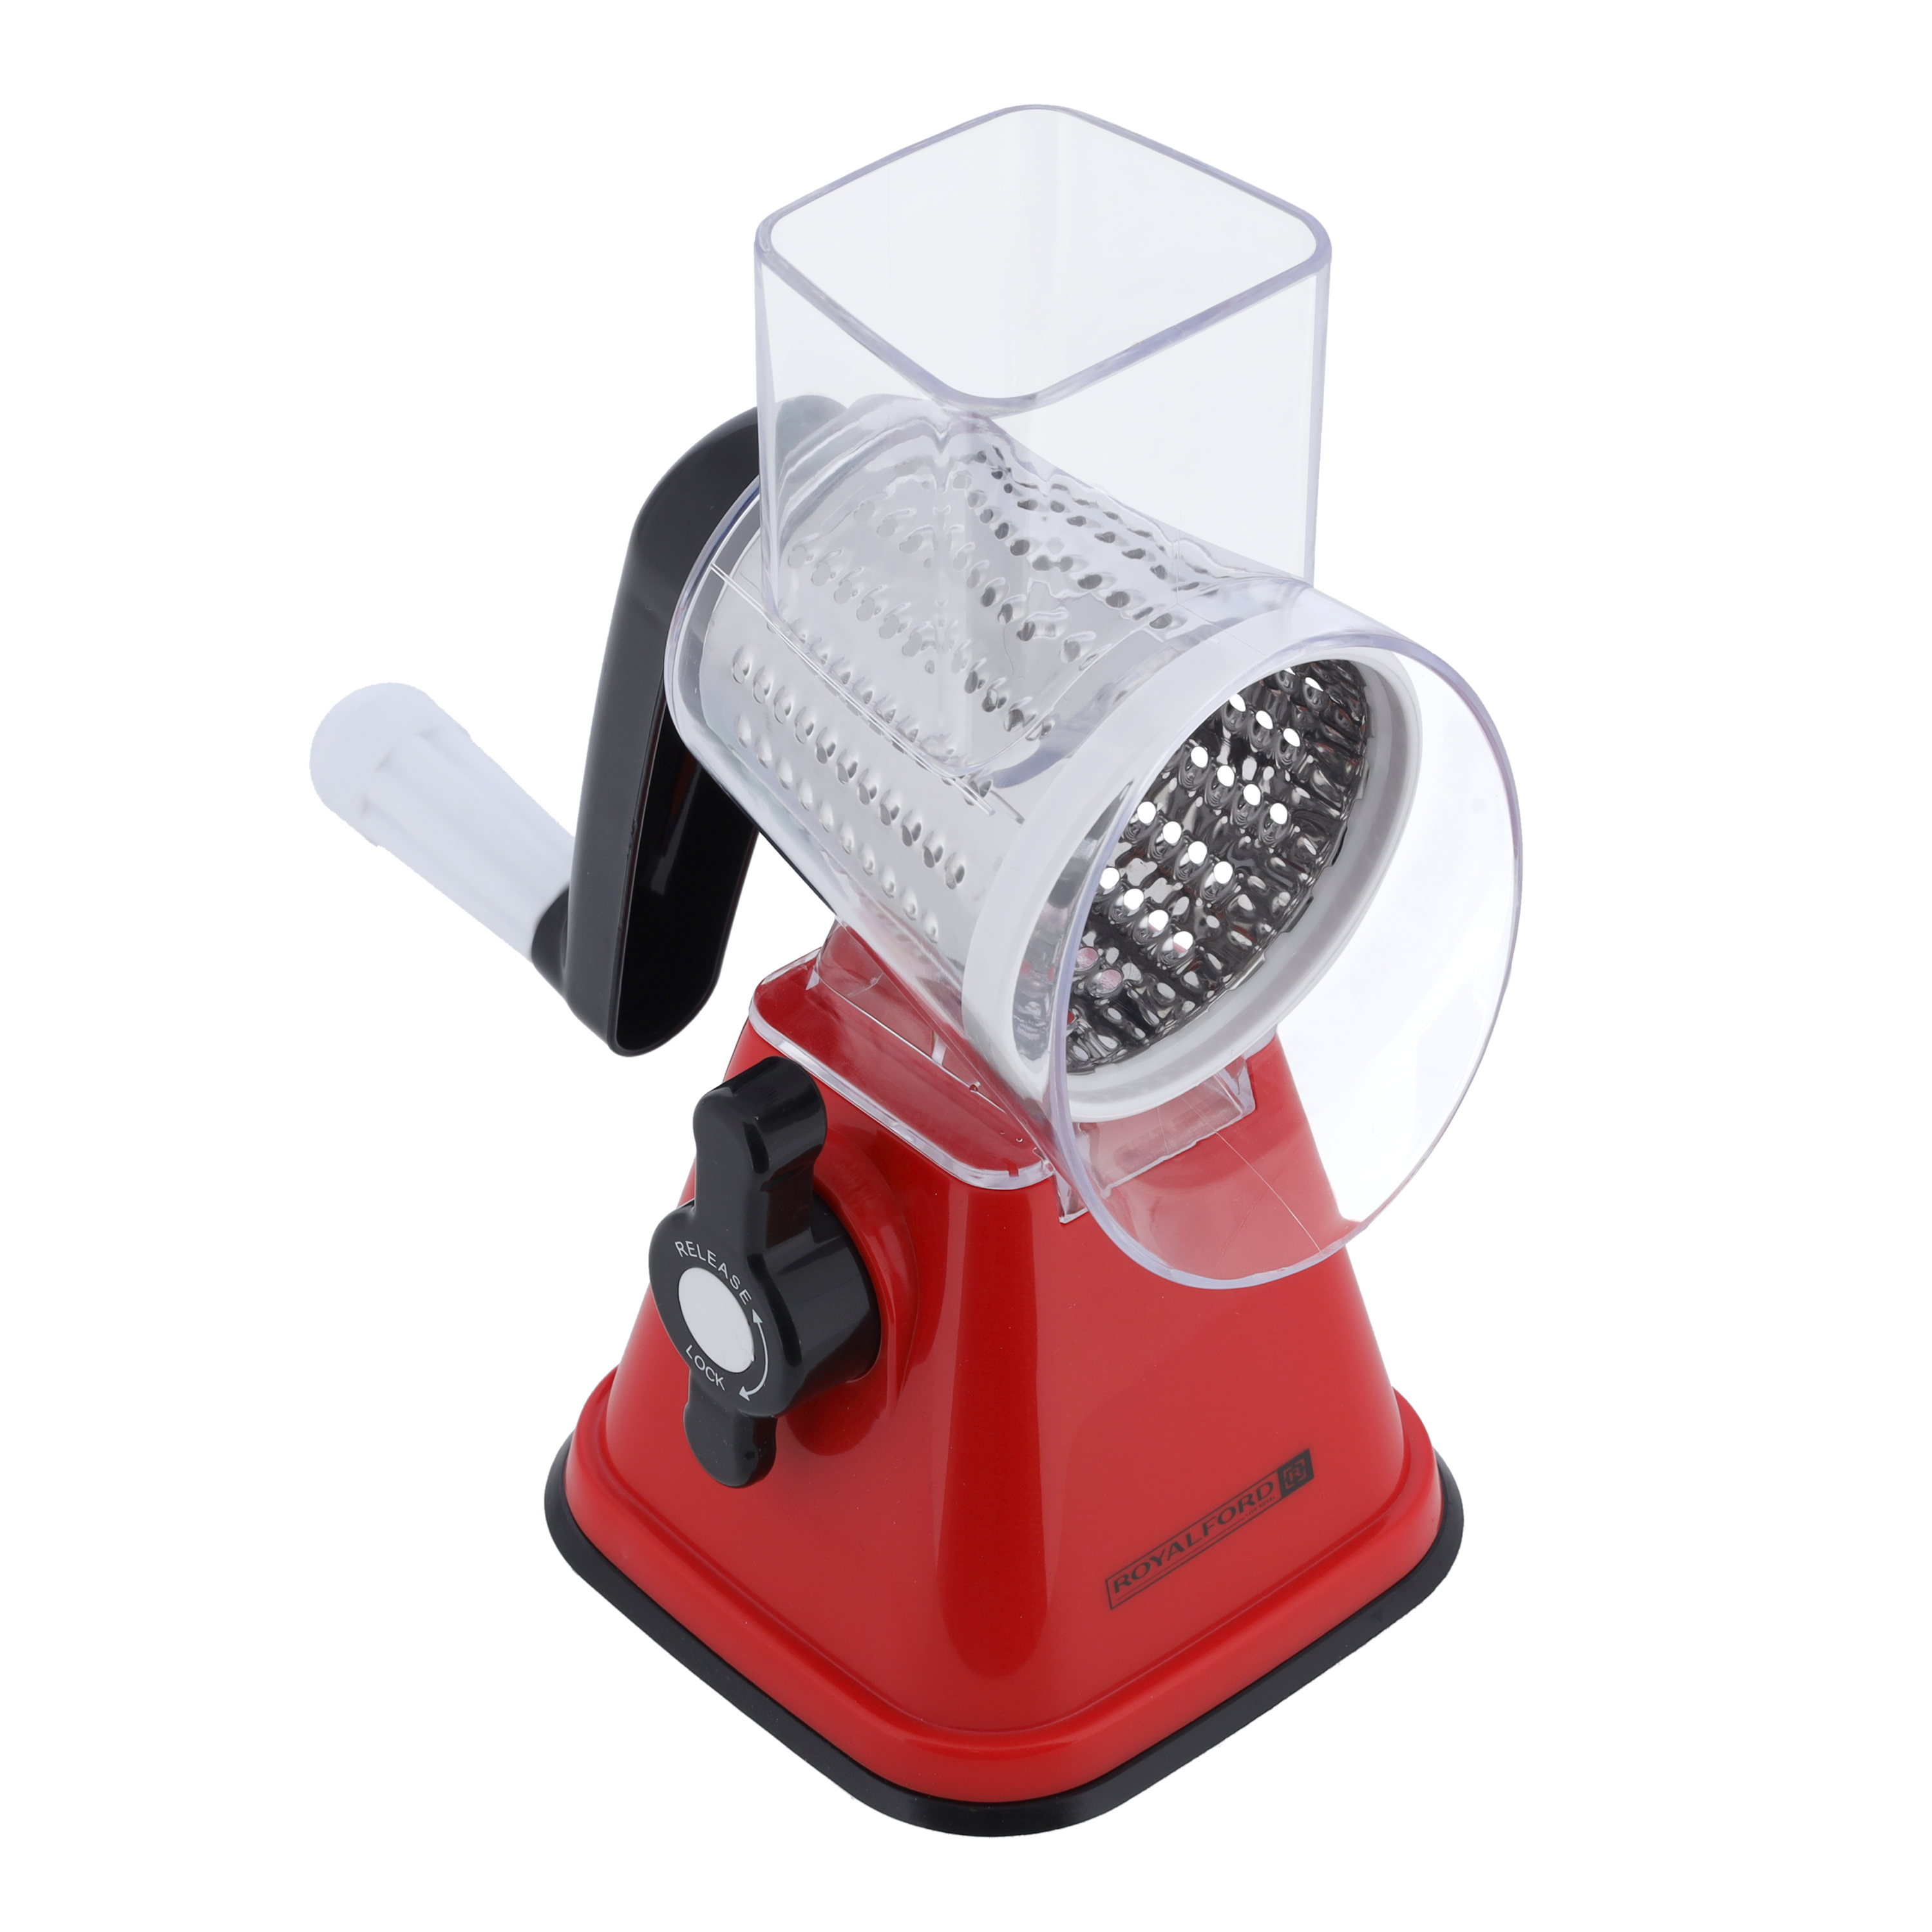 Vavan Kitchen 3-in-1 Rotary Cheese Grater with Handle - 3 Different Stainless Steel Blades, Easy Hand Crank, Strong Suction Holds Secure to Counter